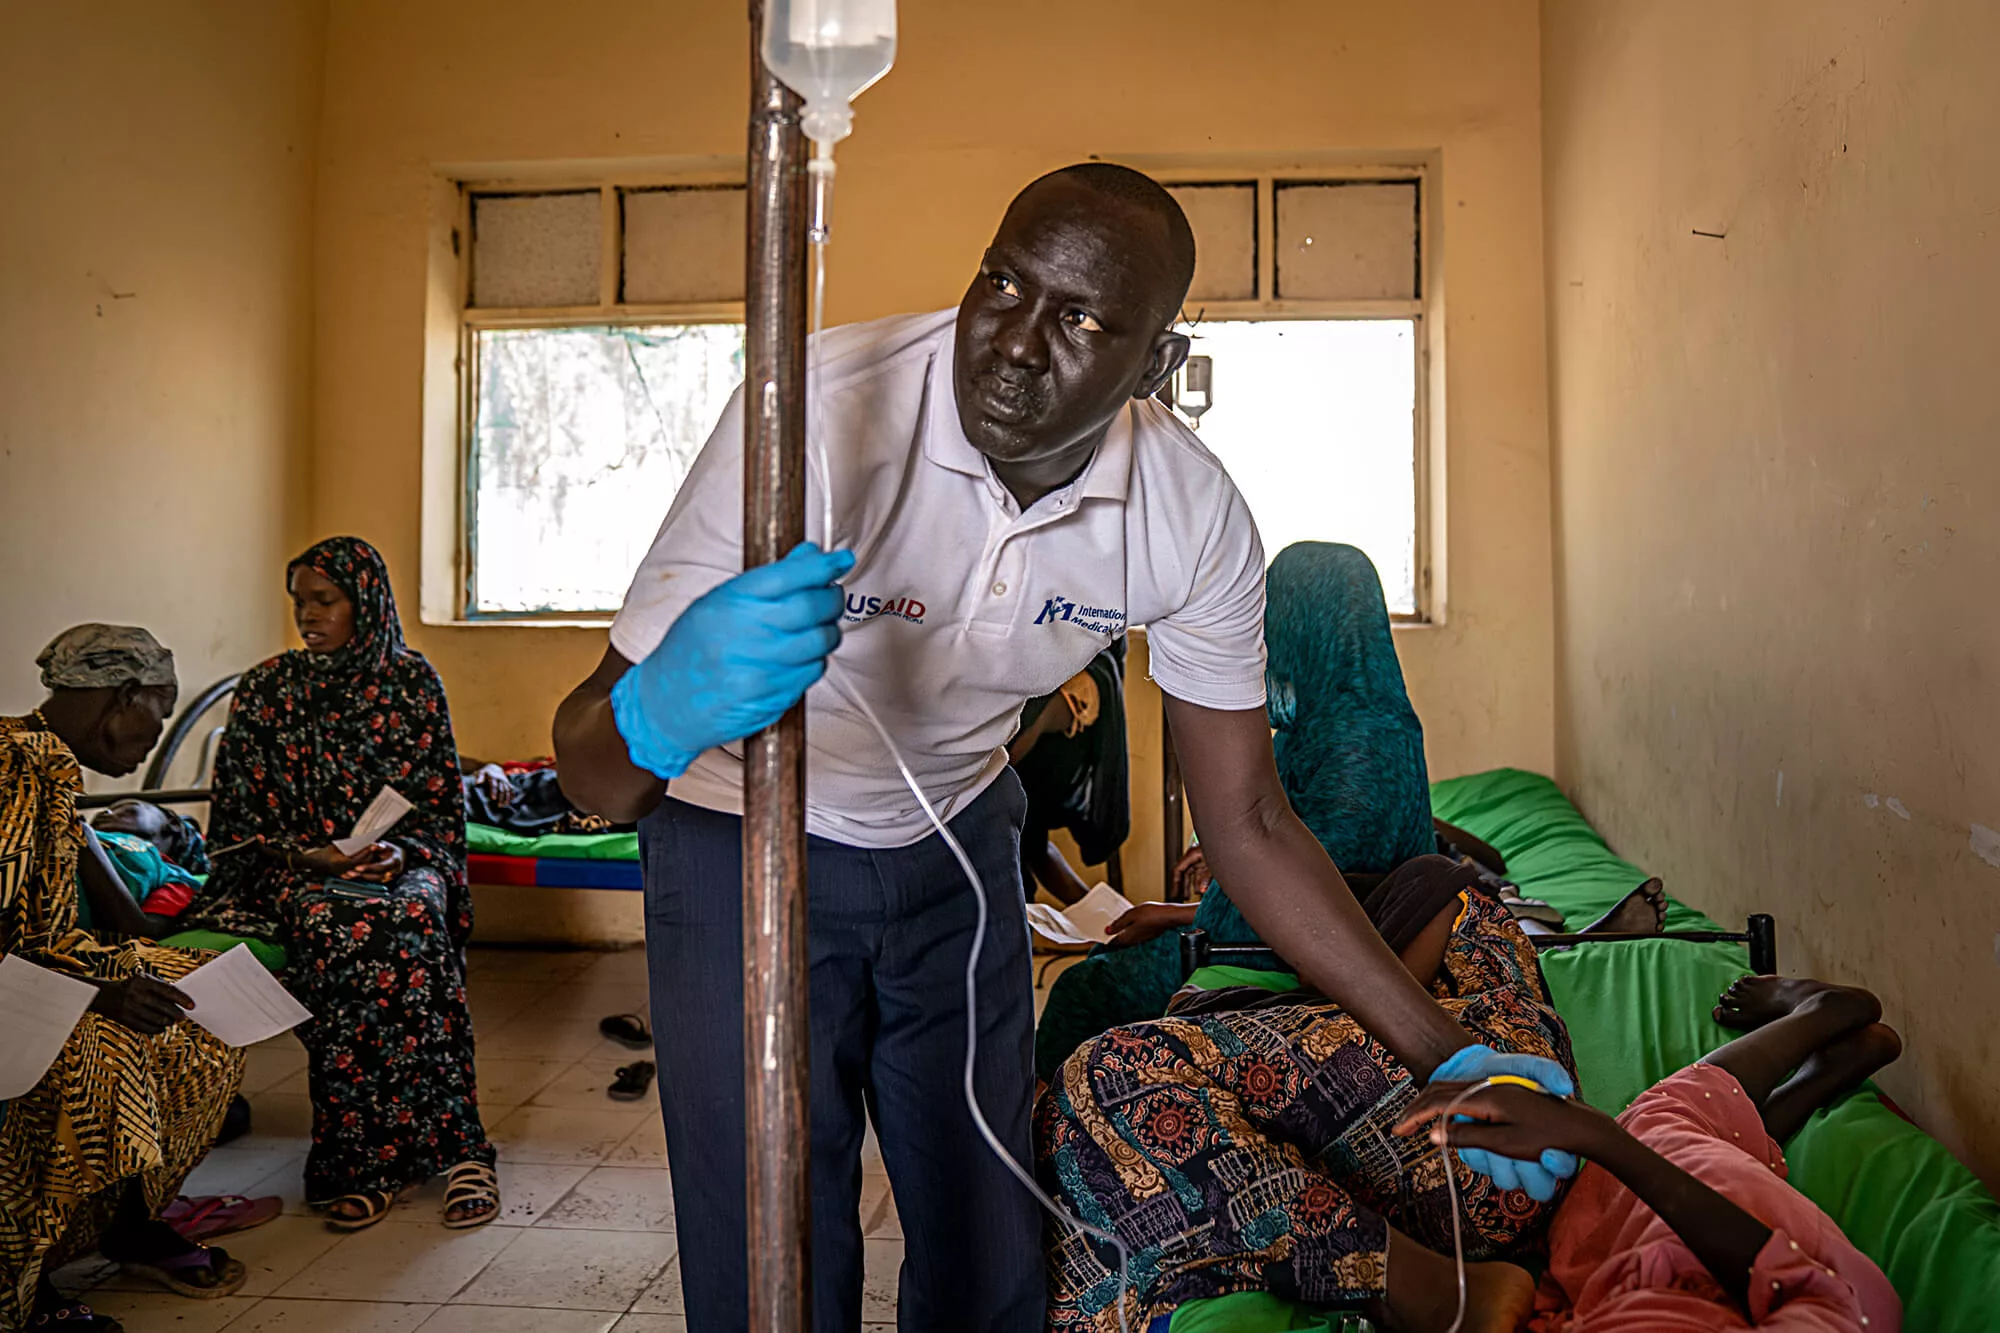 An International Medical Corps nurse administers an IV for Sabrina Abdulatif, 16 years old, who arrived at the health clinic in Renk with complaints of a fever, headache and body pain.